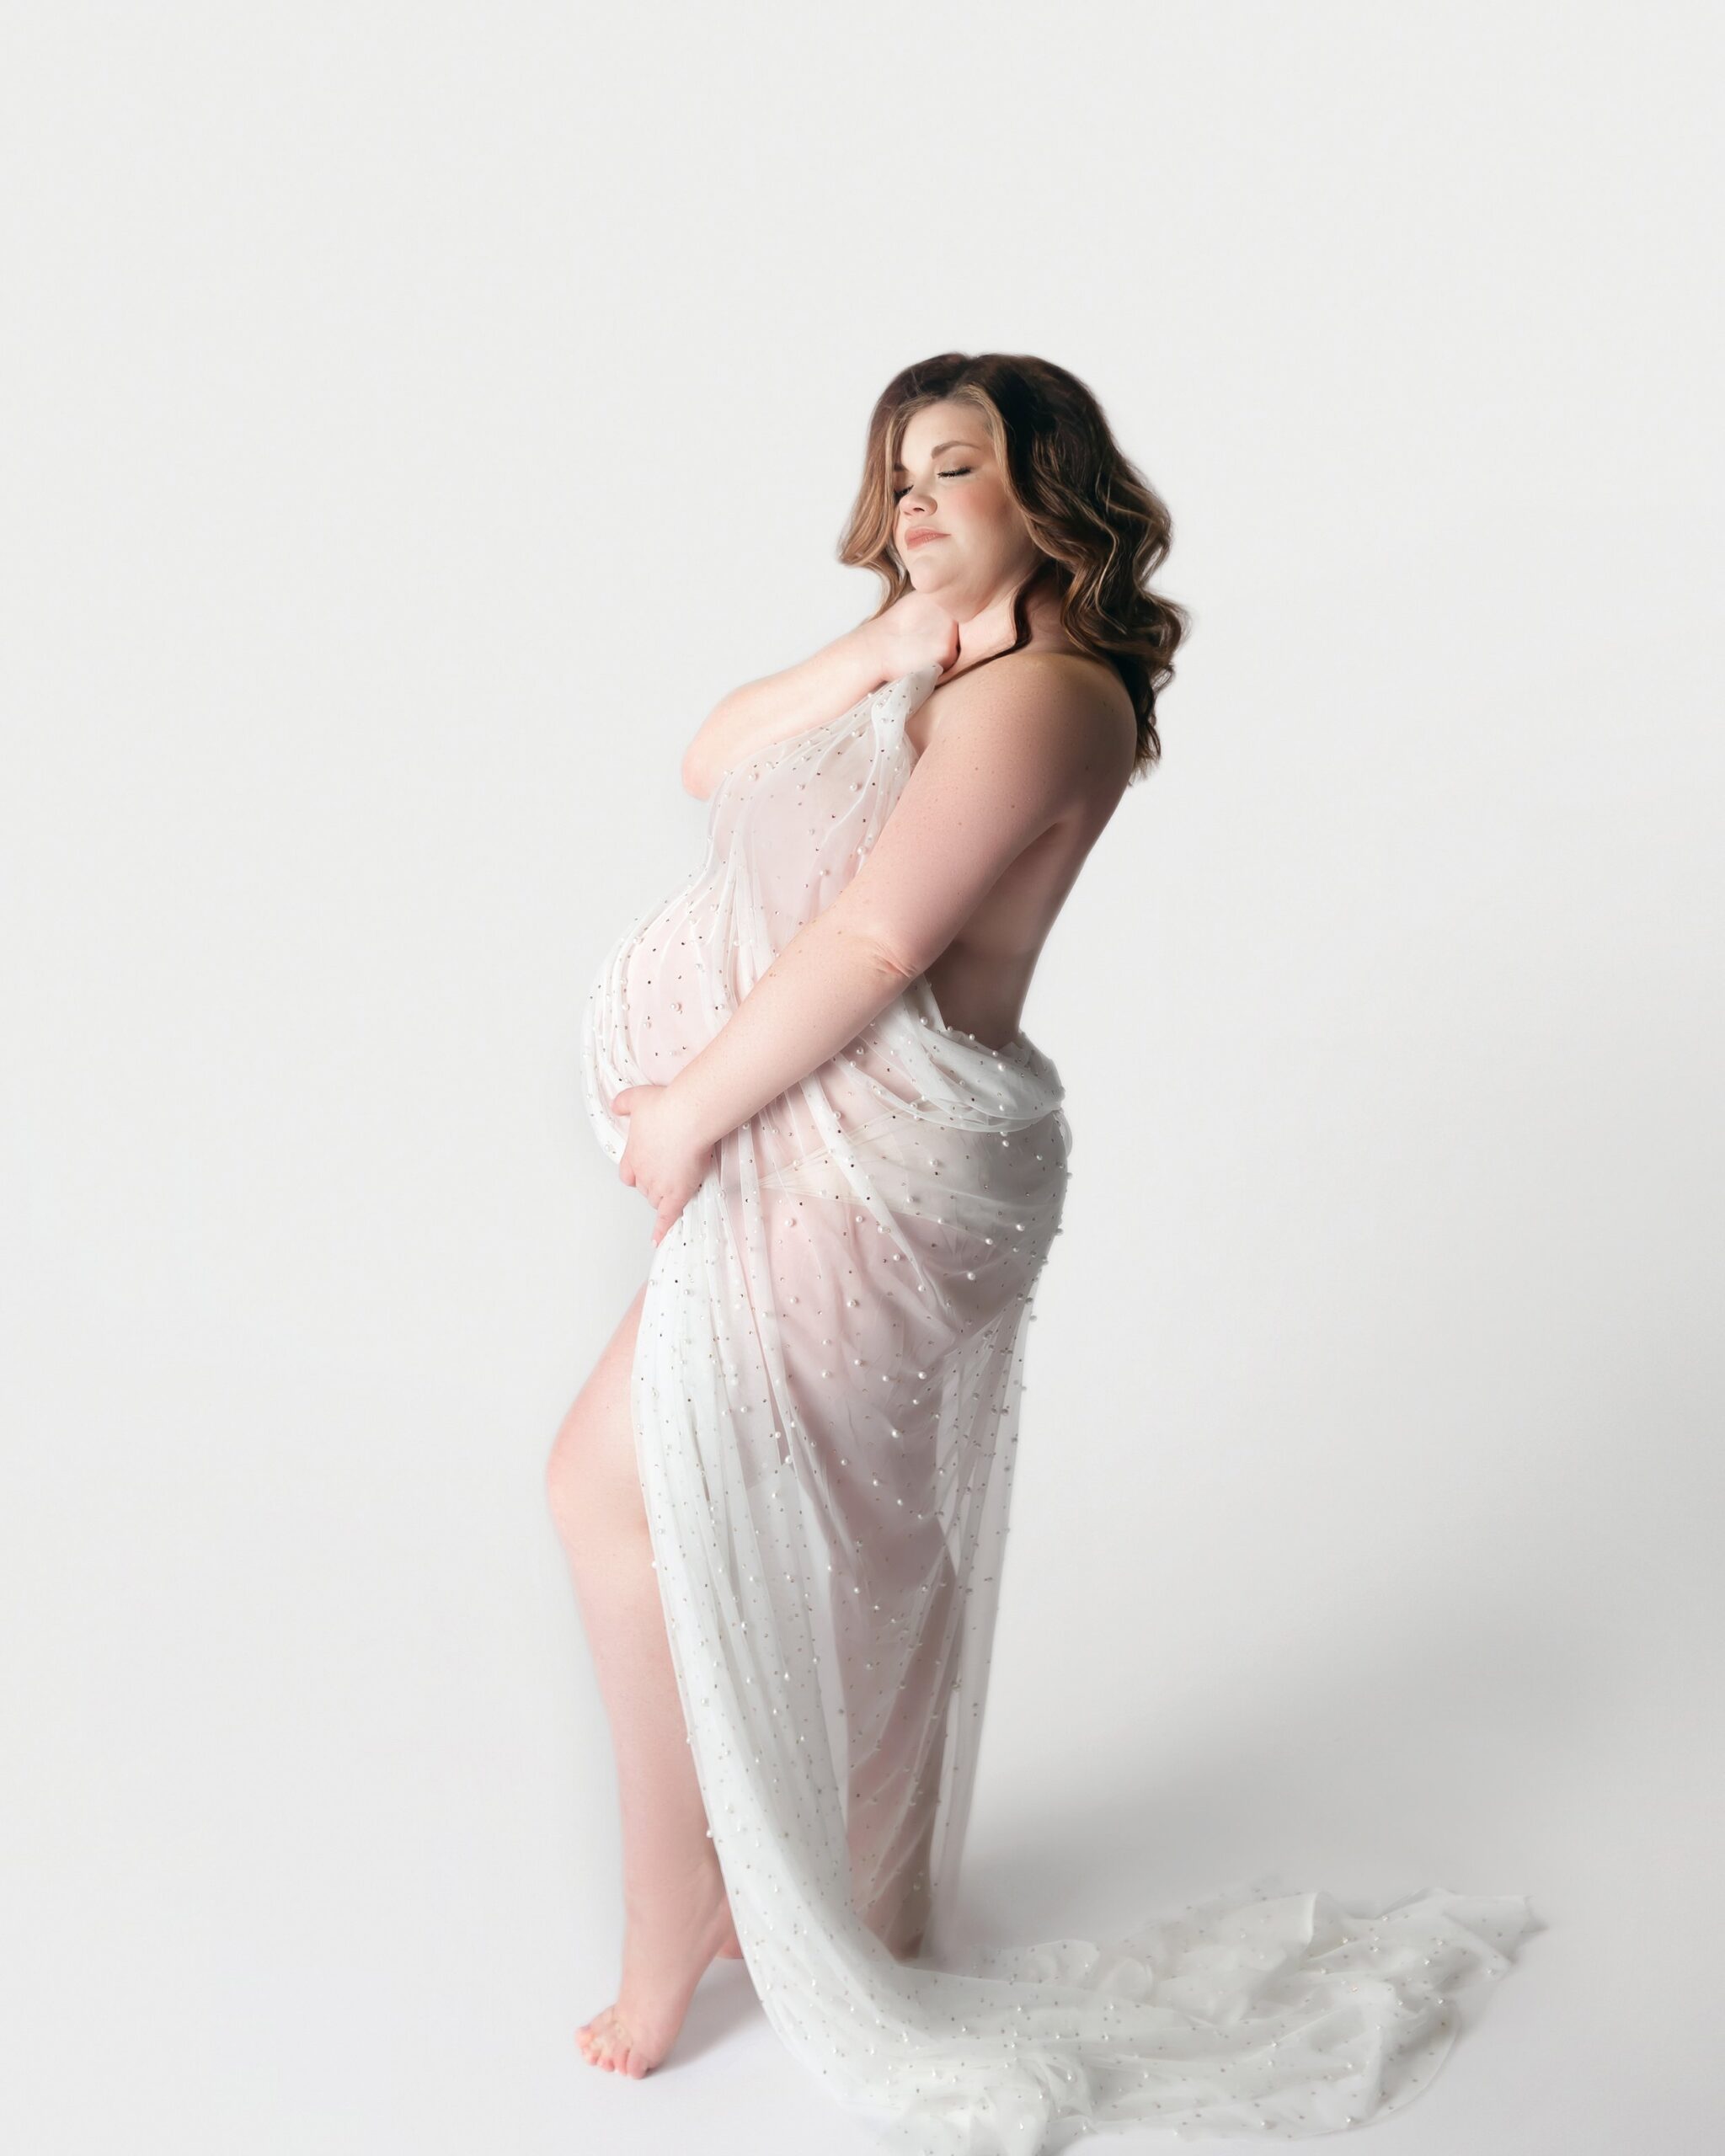 pregnant women with white fabric draped over her belly, during maternity photoshoot in mount juliet tennessee photography studio, near me